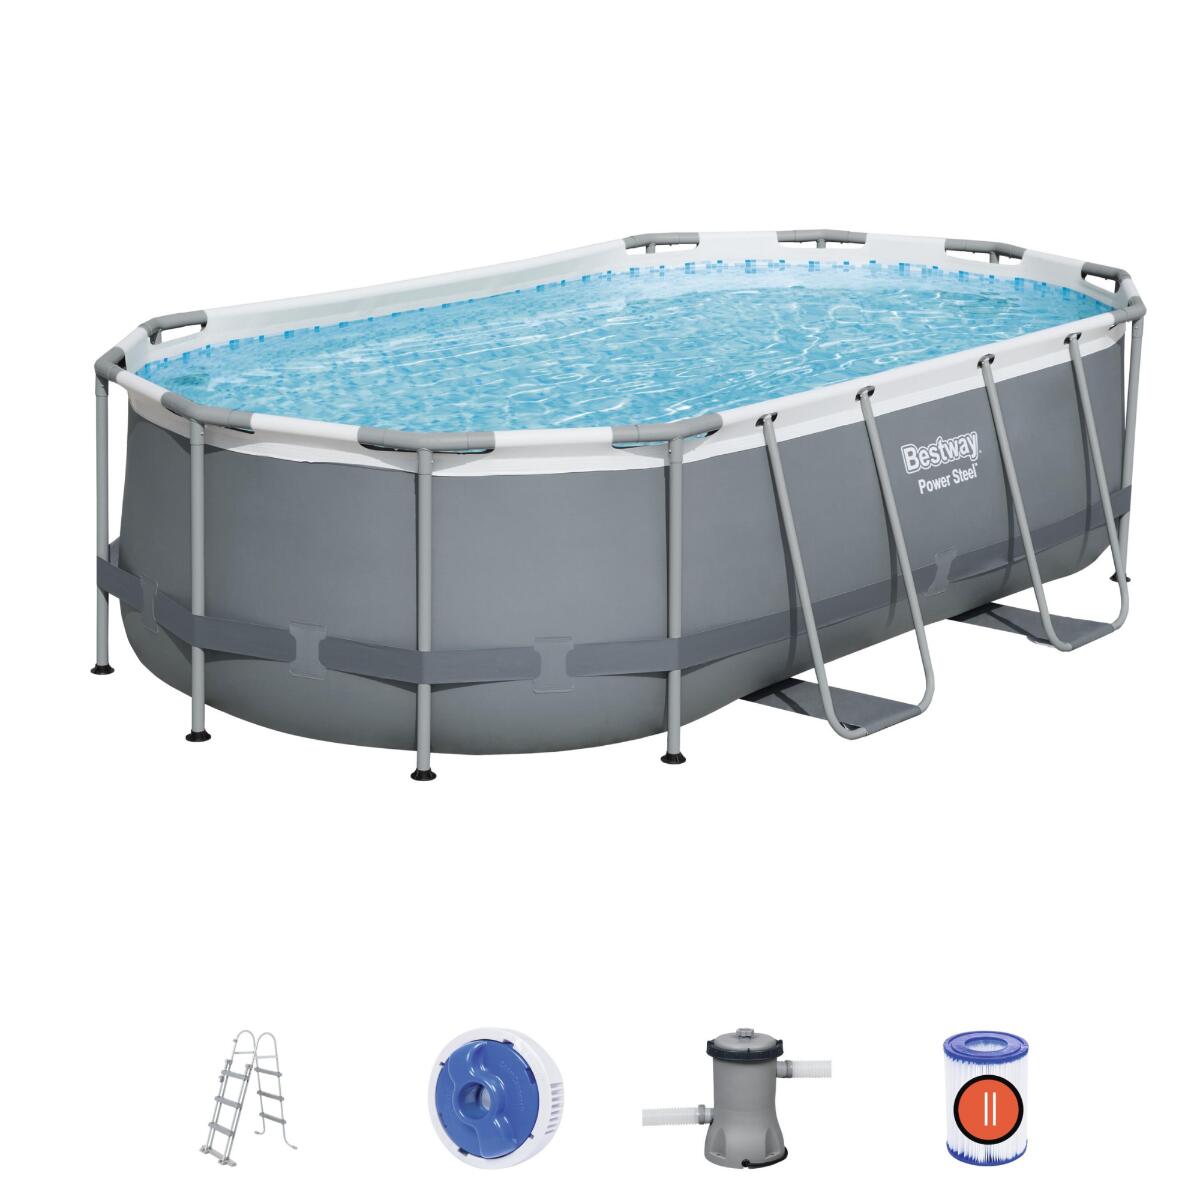 Bestway 14ft x 8ft 2" x 39.5" Oval Power Steel Above Ground Swimming Pool 5/7